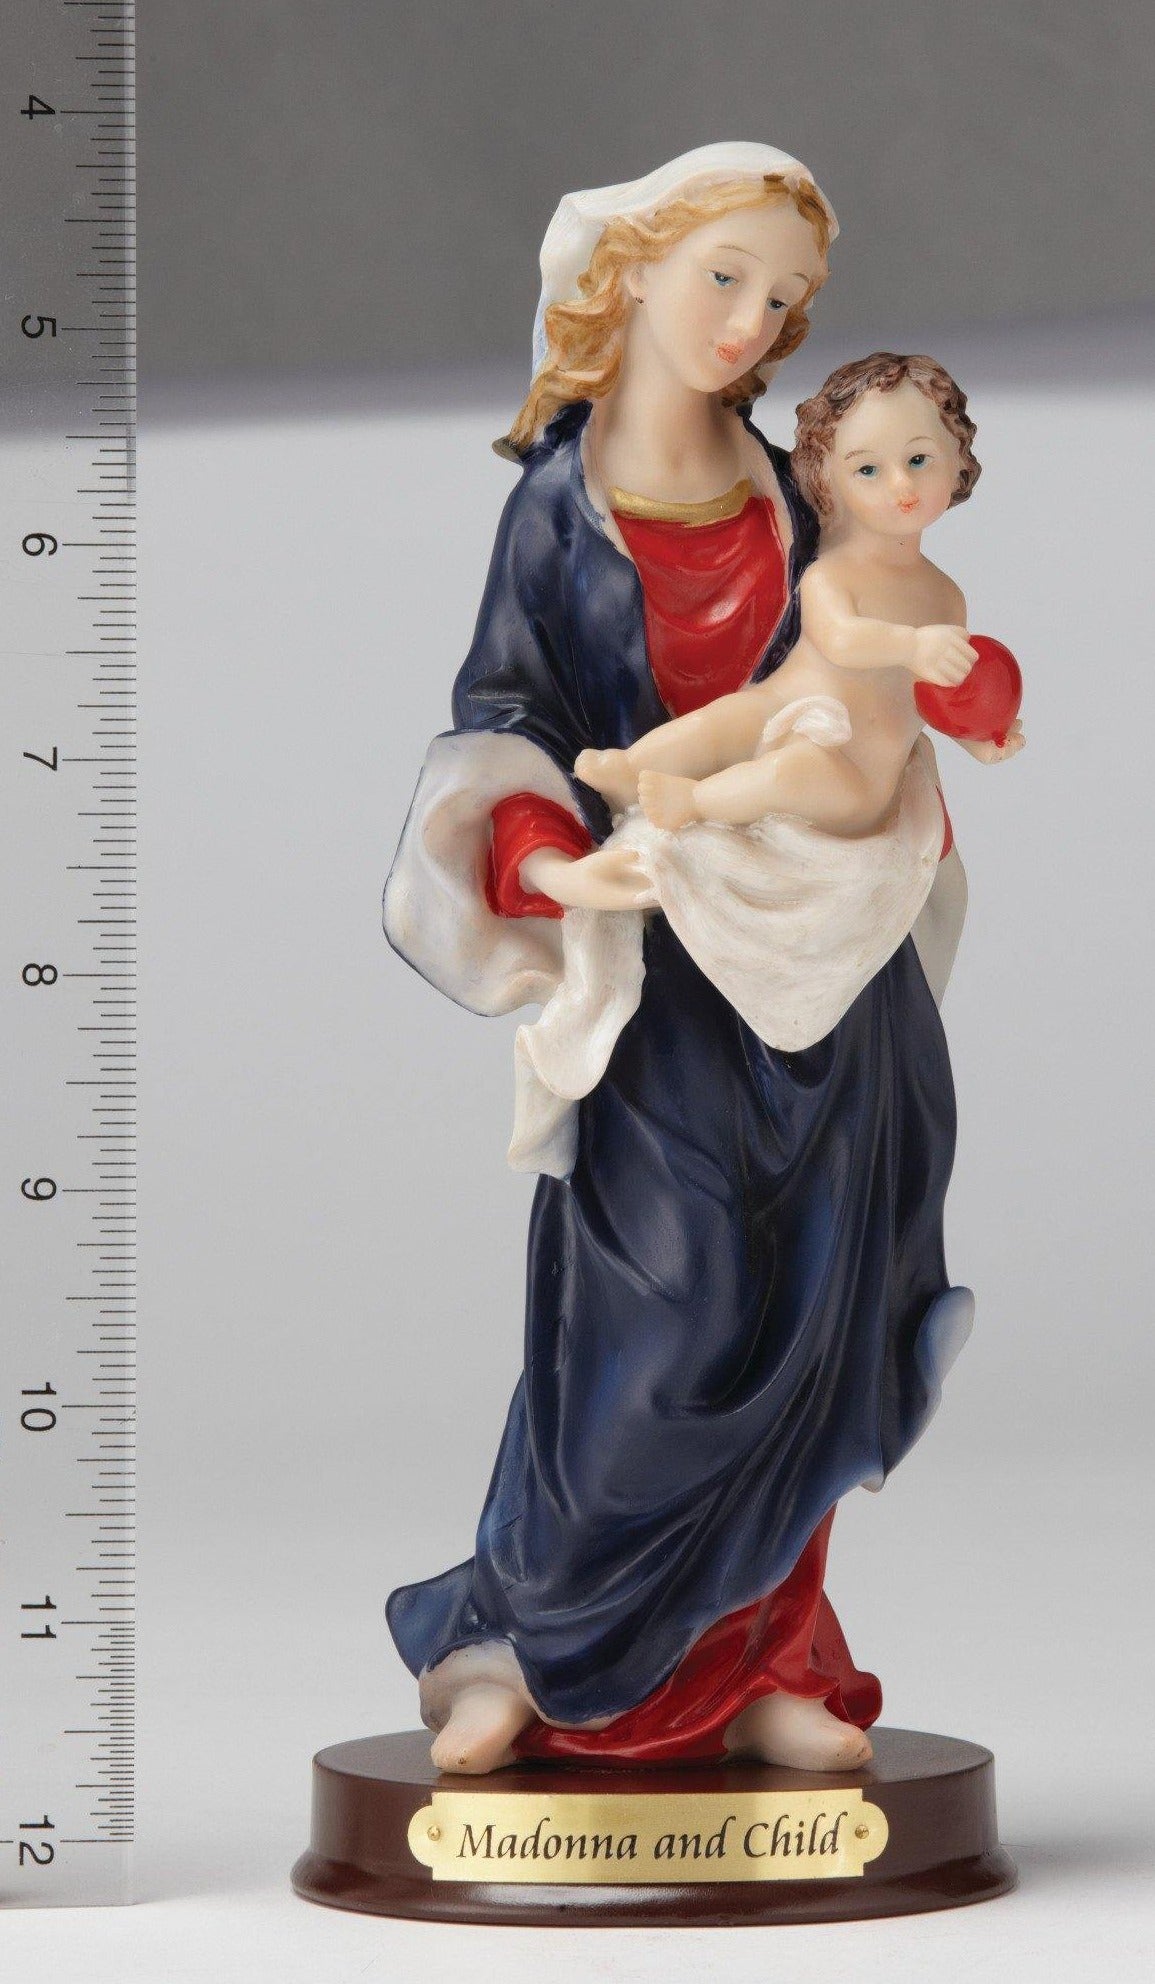 8" Madonna and Child Statue - Hand Painted - Religious Art - Chiarelli's Religious Goods & Church Supply